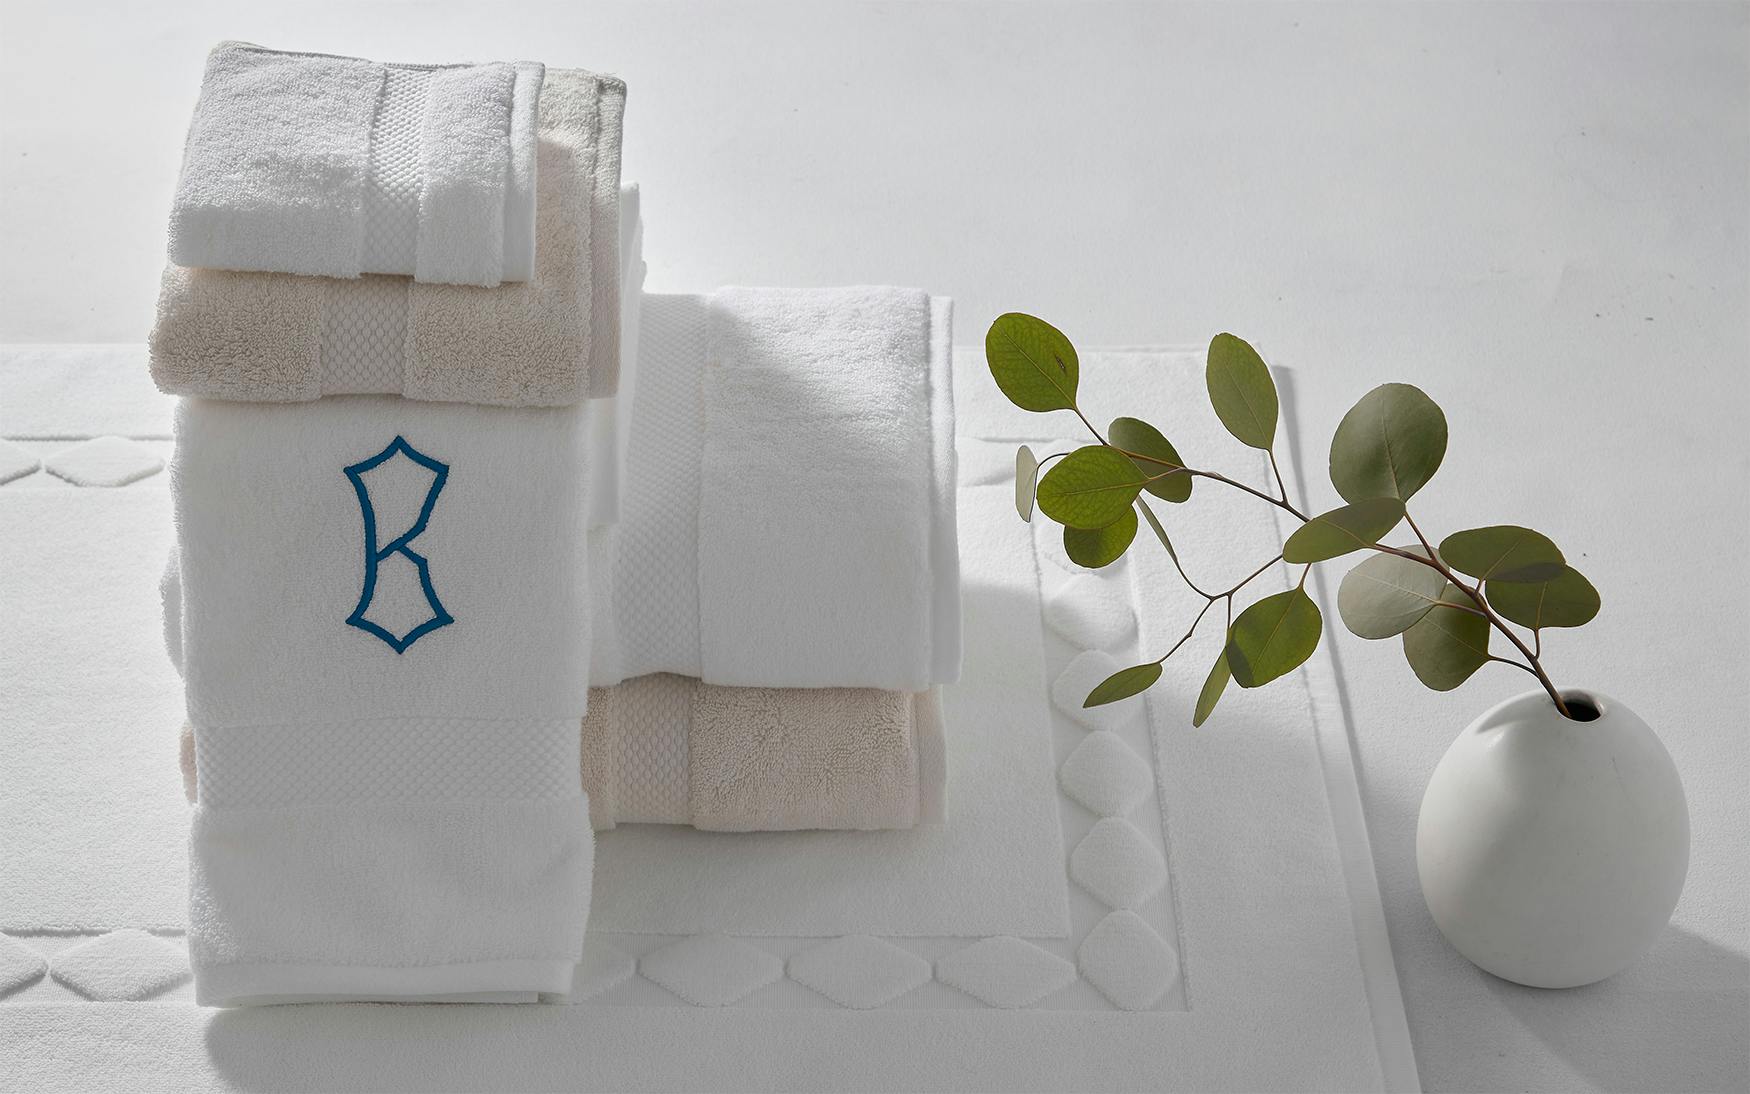 Matouk ~ Guesthouse ~ Bath Sheet, Price $85.00 in Mobile, AL from